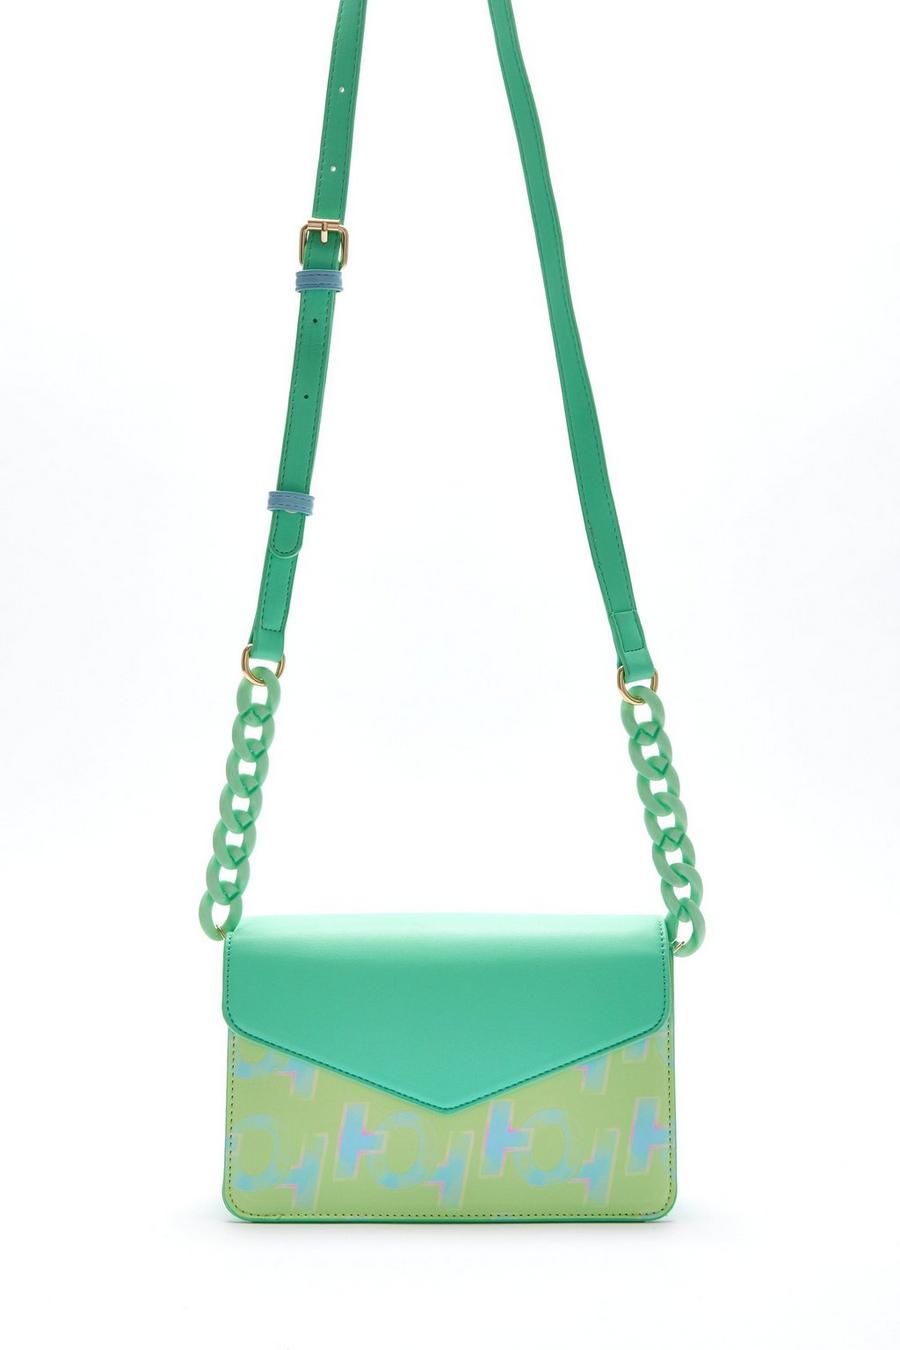 Green Cross Body Bag In Mint And Pistachio With A Logo Print And Chain Detail Strap